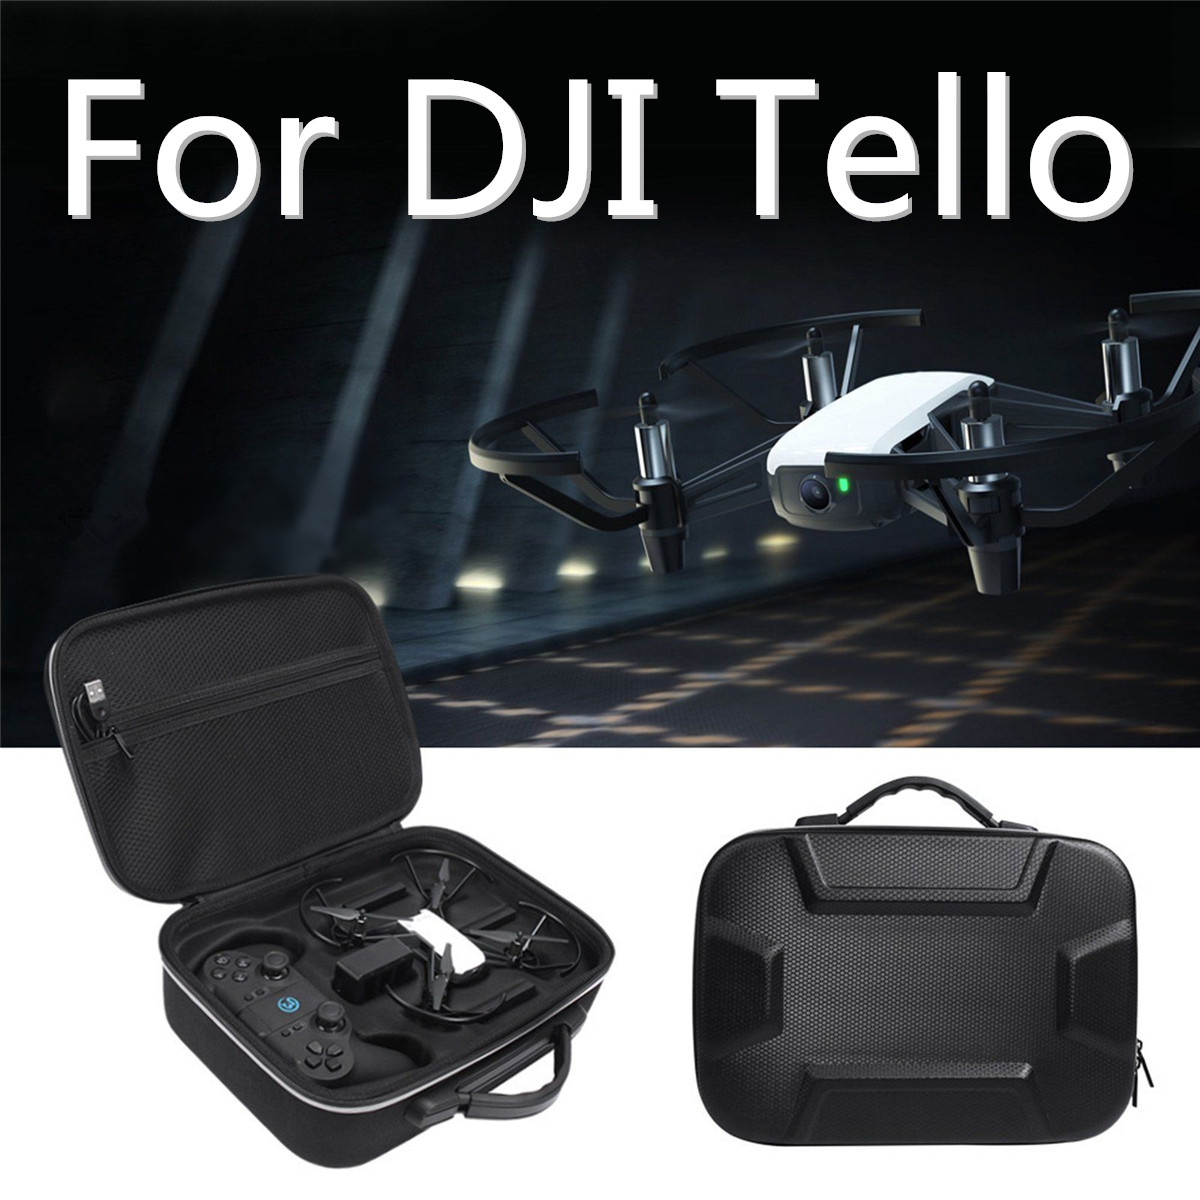 NEW Storage Case Cover Carry Bag Pouch For DJI Tello Drone & GameSir T1d Remote 